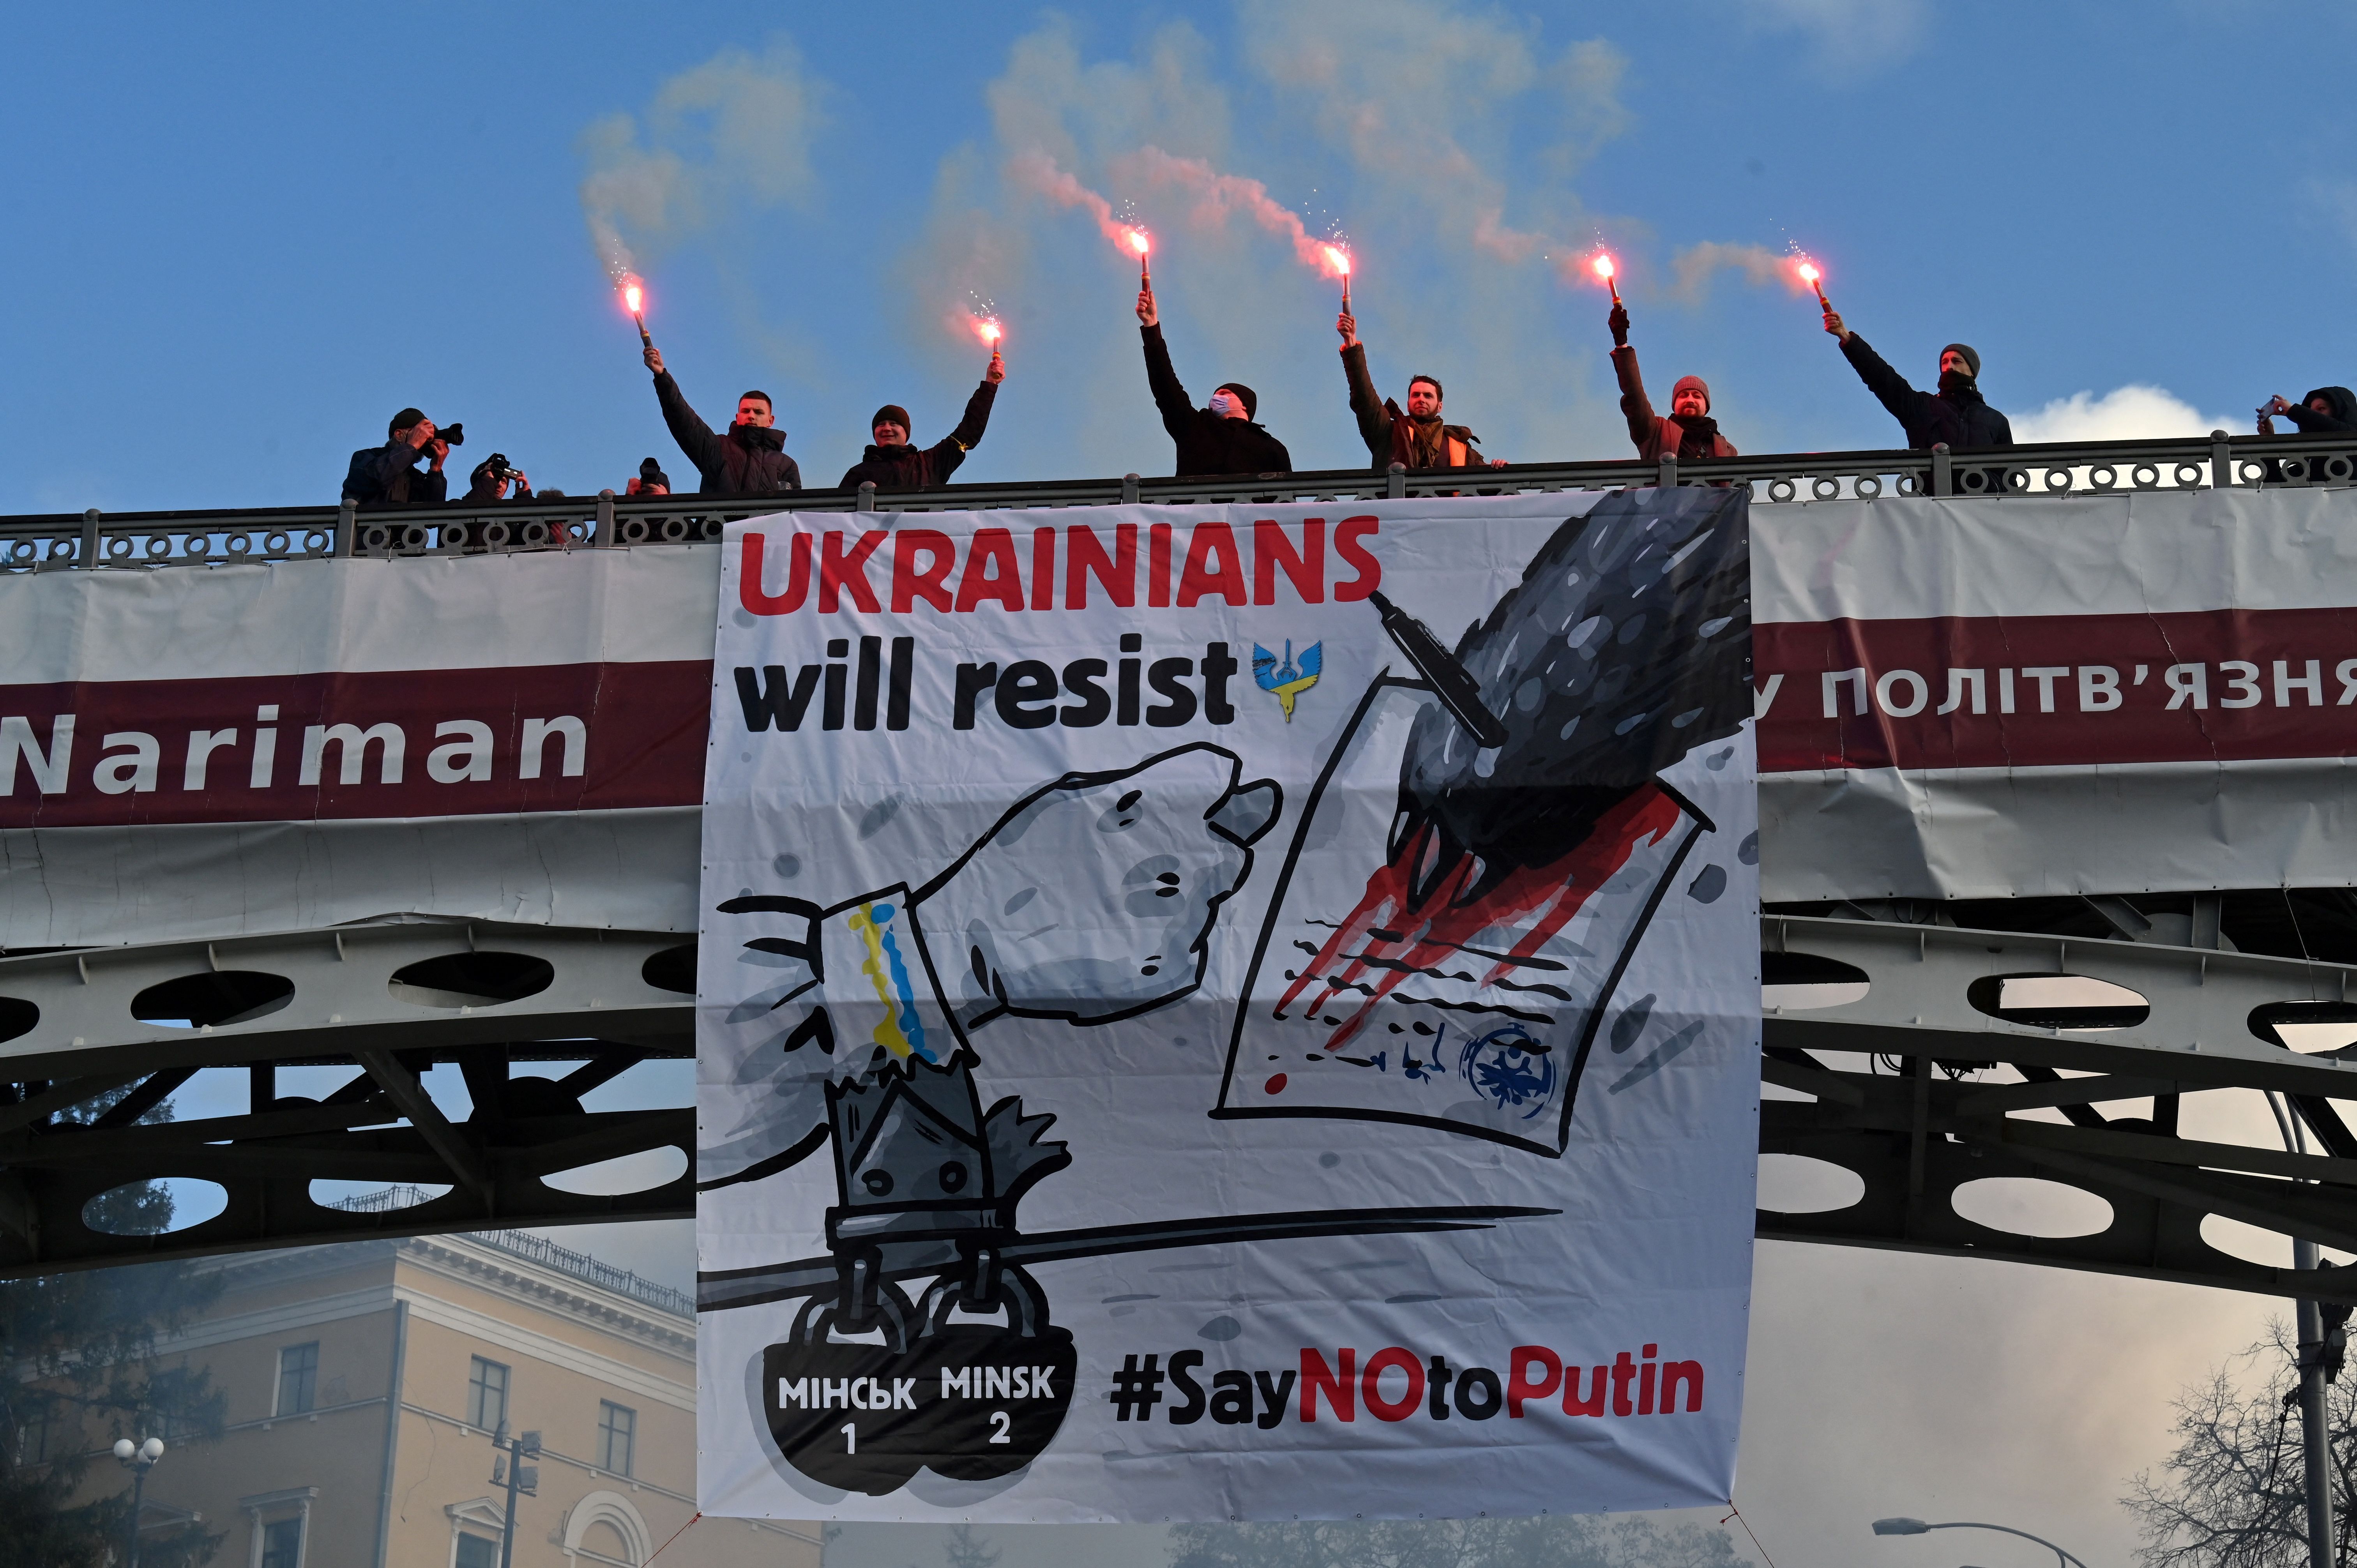 Demonstrators shout slogans as they stand with lit flares on a bridge adorned with a banner 'Ukranians will resist - Say No to Putin' during a rally in Kyiv on February 12, 2022.